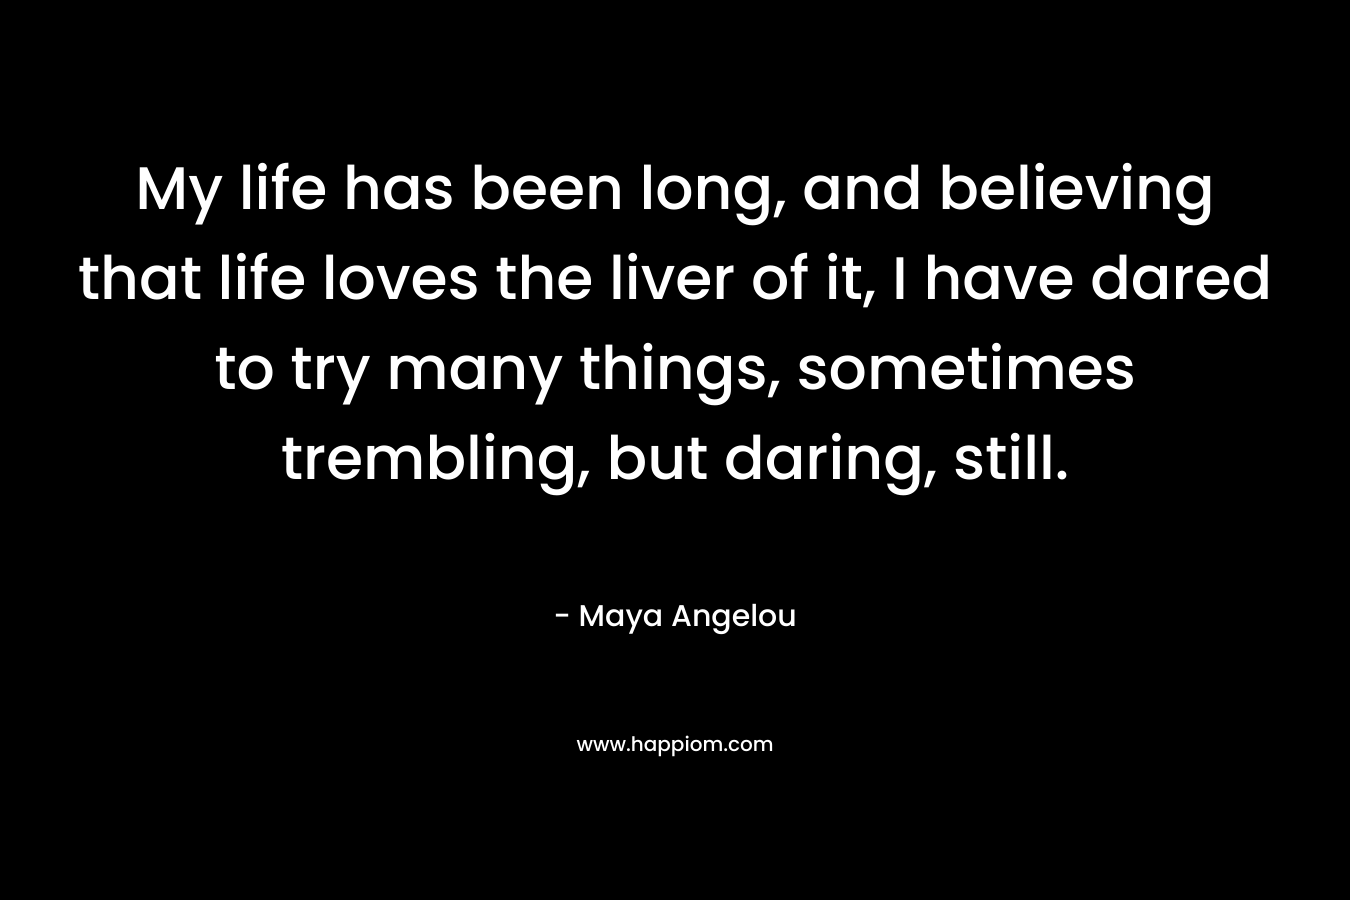 My life has been long, and believing that life loves the liver of it, I have dared to try many things, sometimes trembling, but daring, still. – Maya Angelou